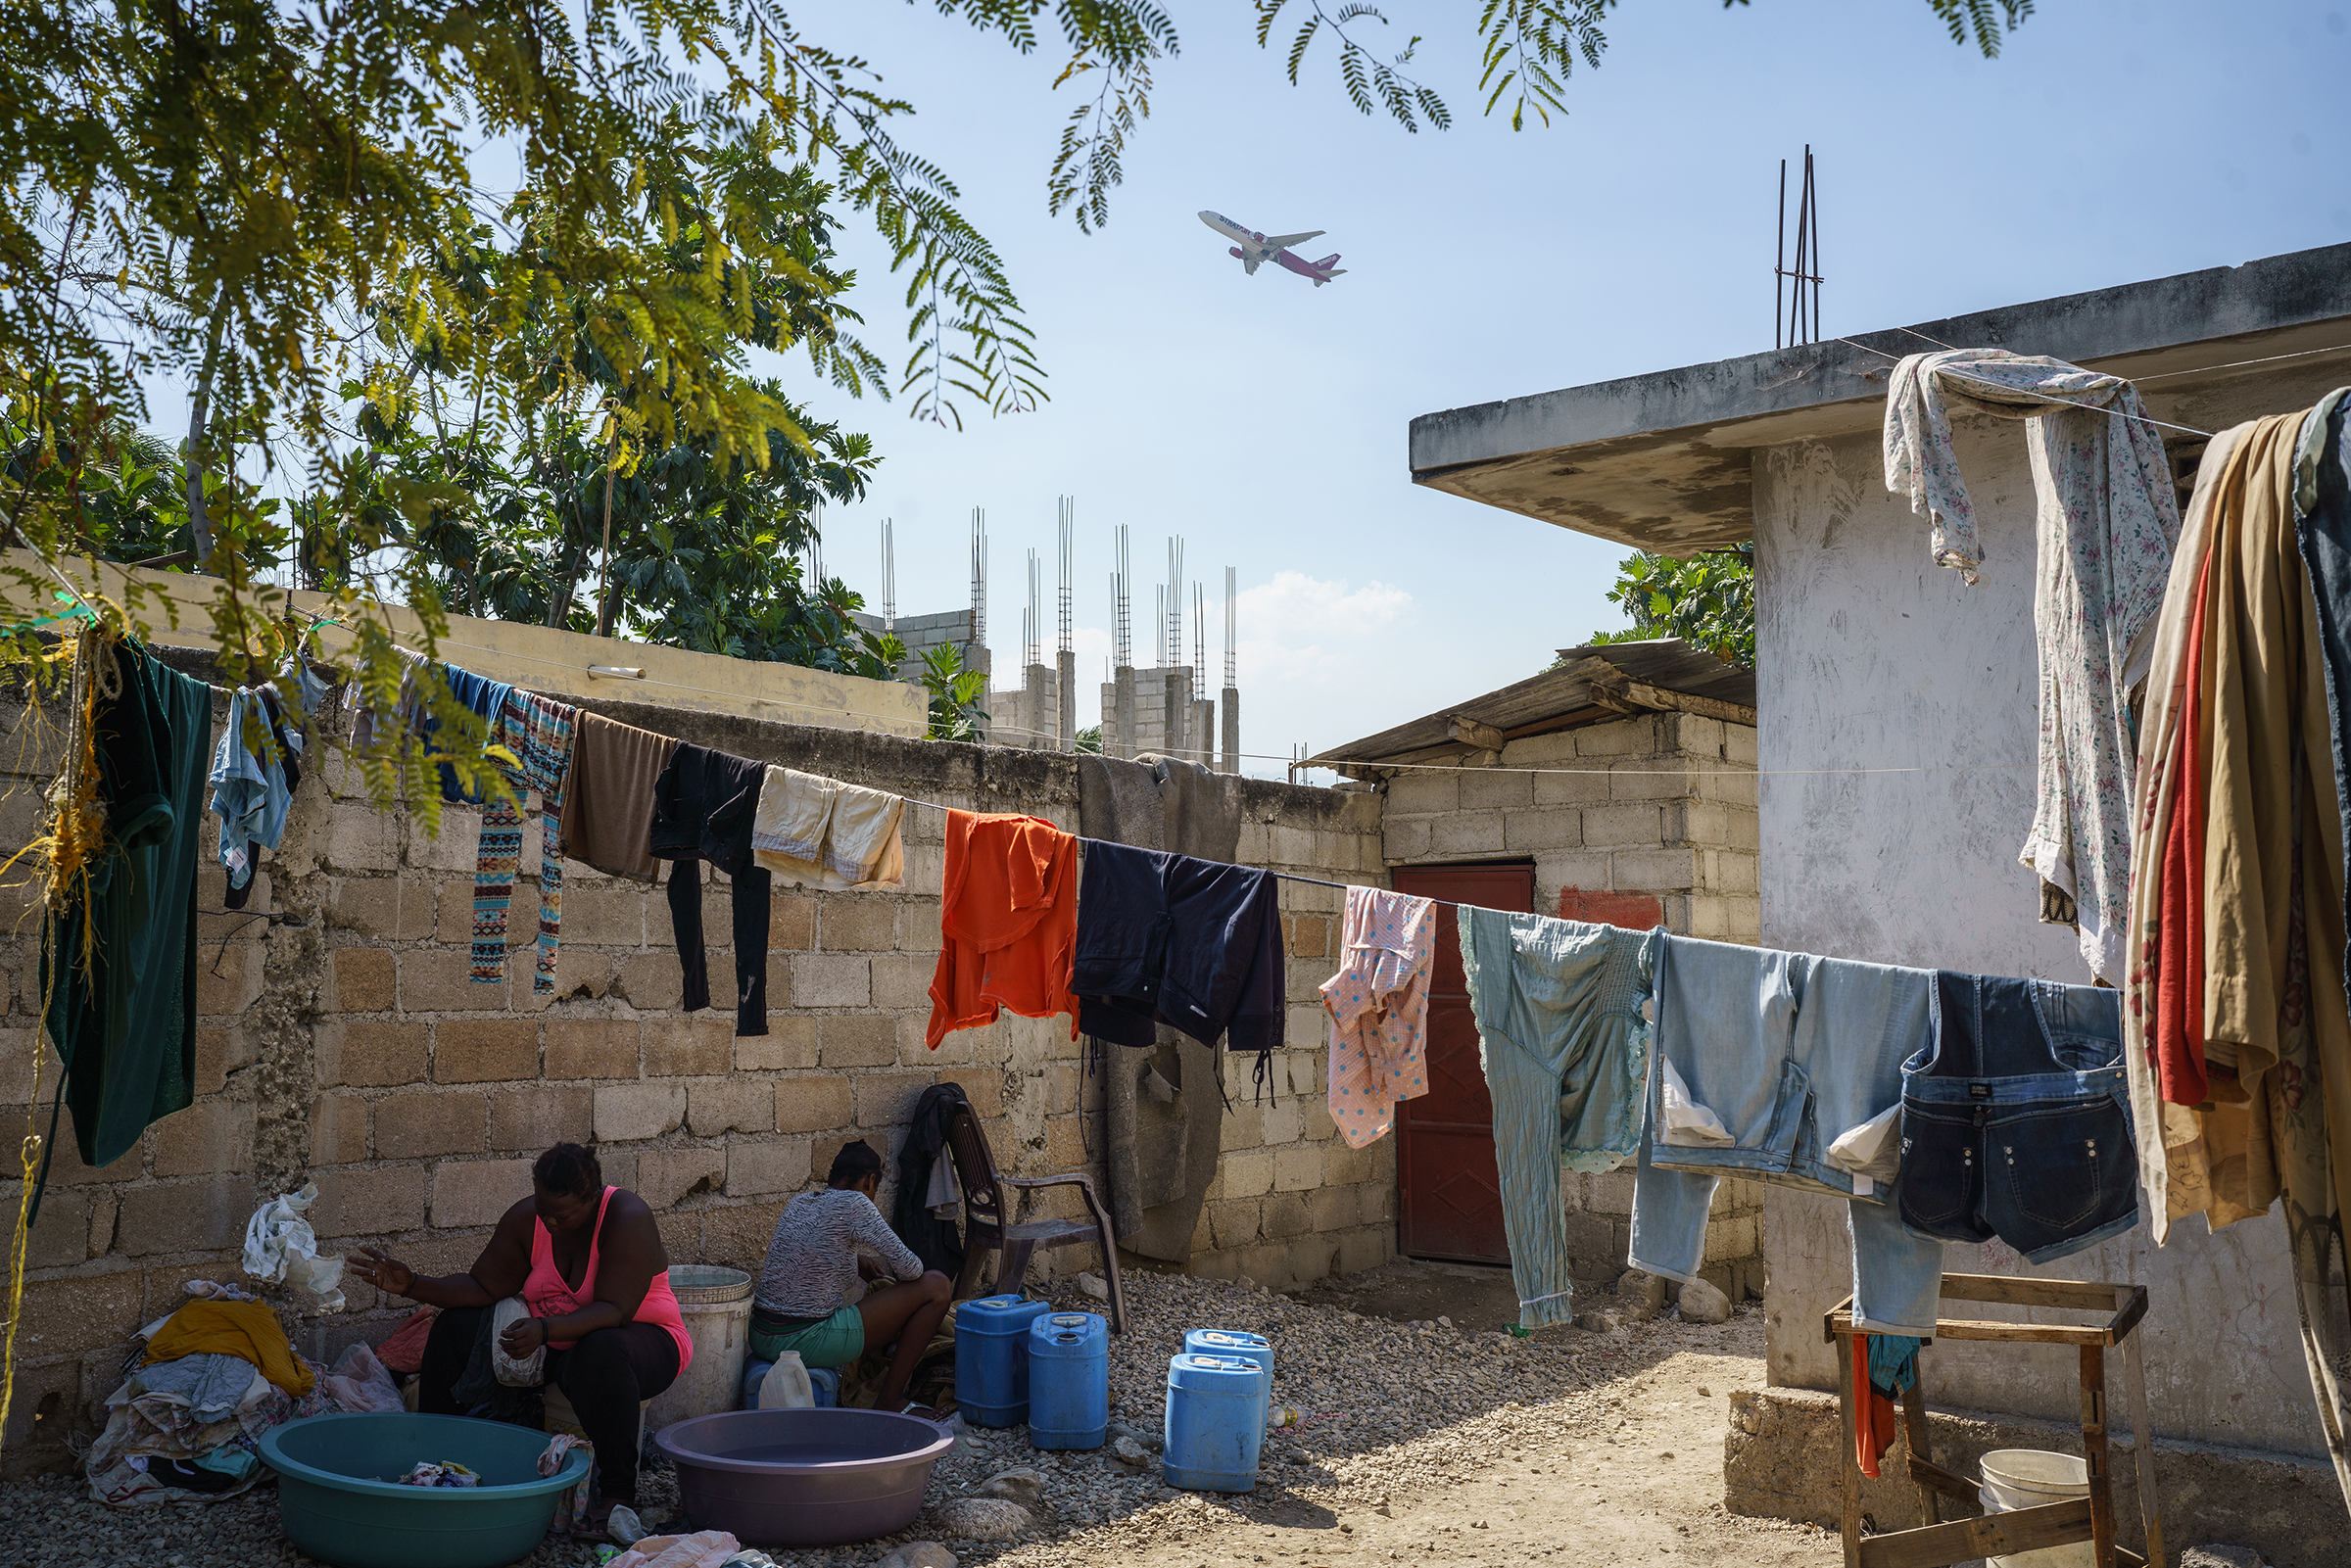 Joseph is staying with a friend in a Port-au-Prince “lakou”—a type of building compound common in Haiti where multiple families live together. Joseph has struggled to find housing since he was expelled to Haiti.